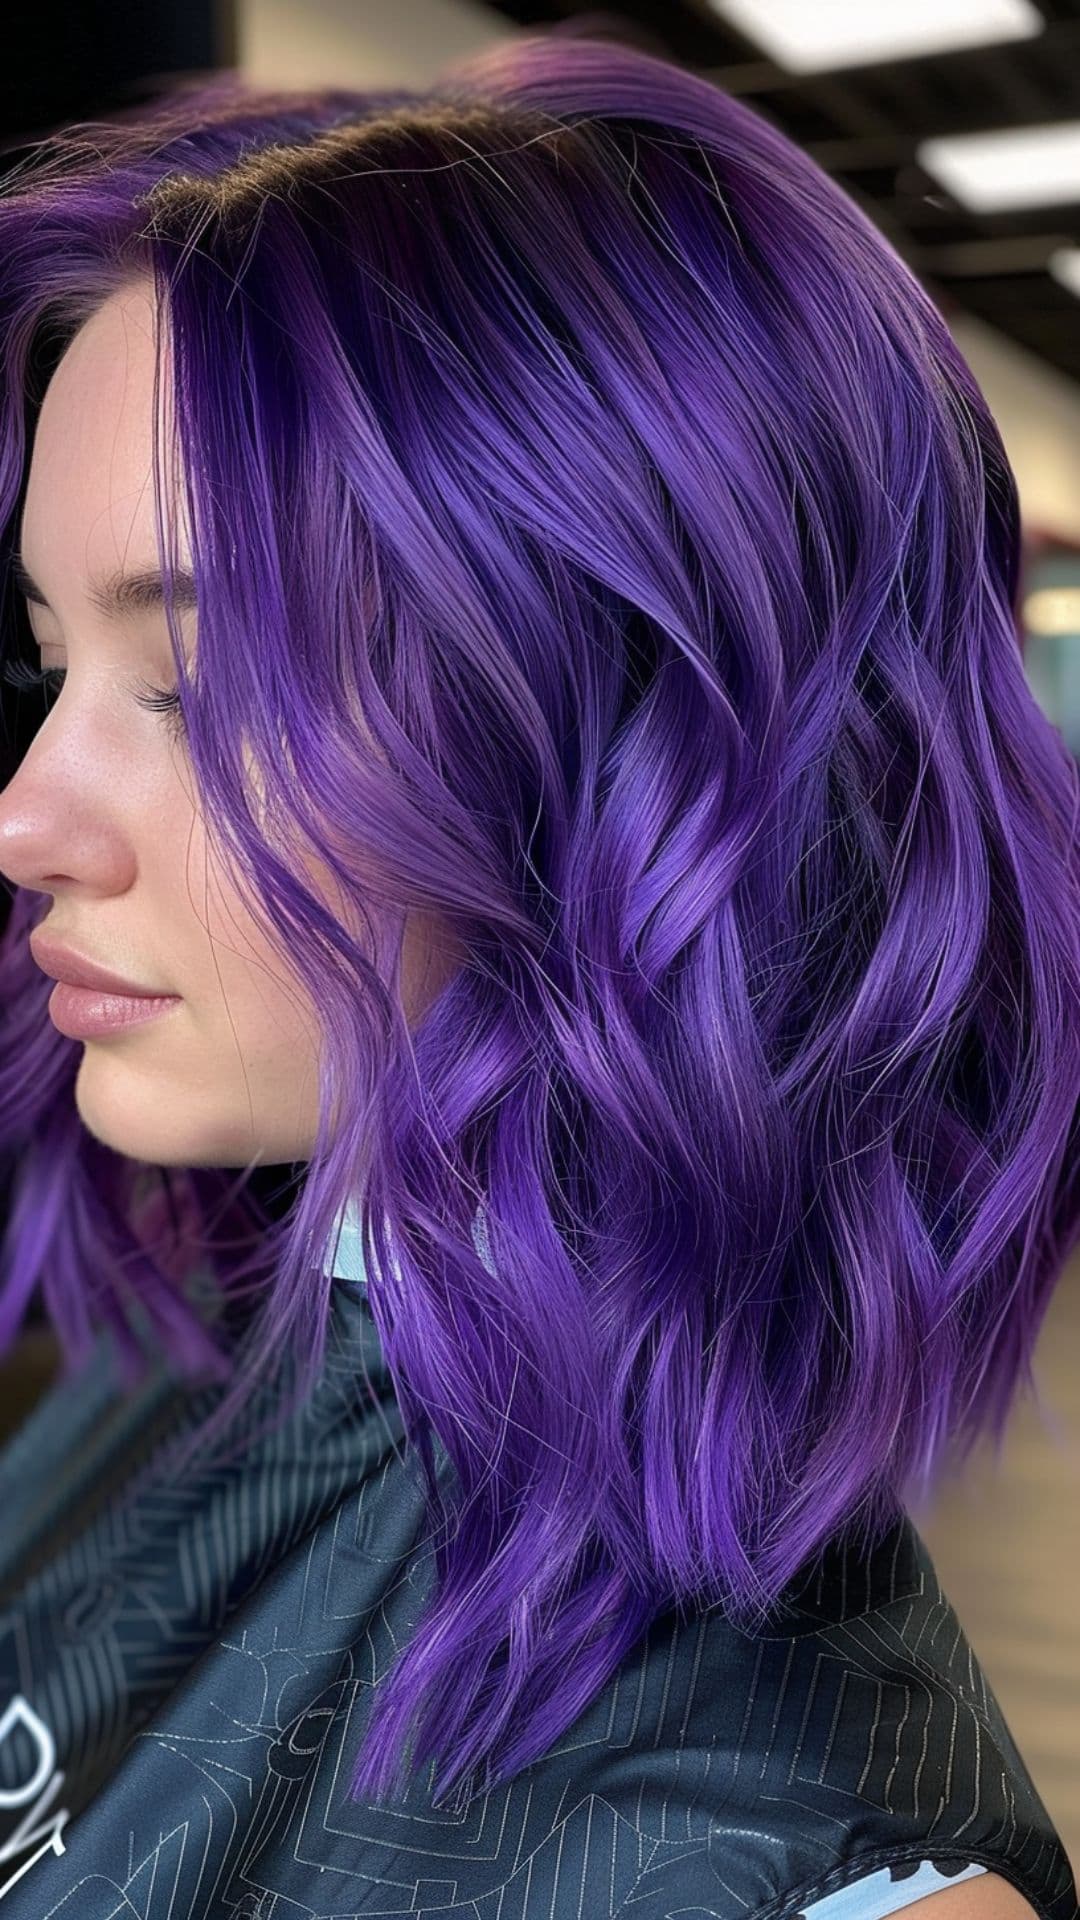 A woman modelling an ultraviolet hair color.